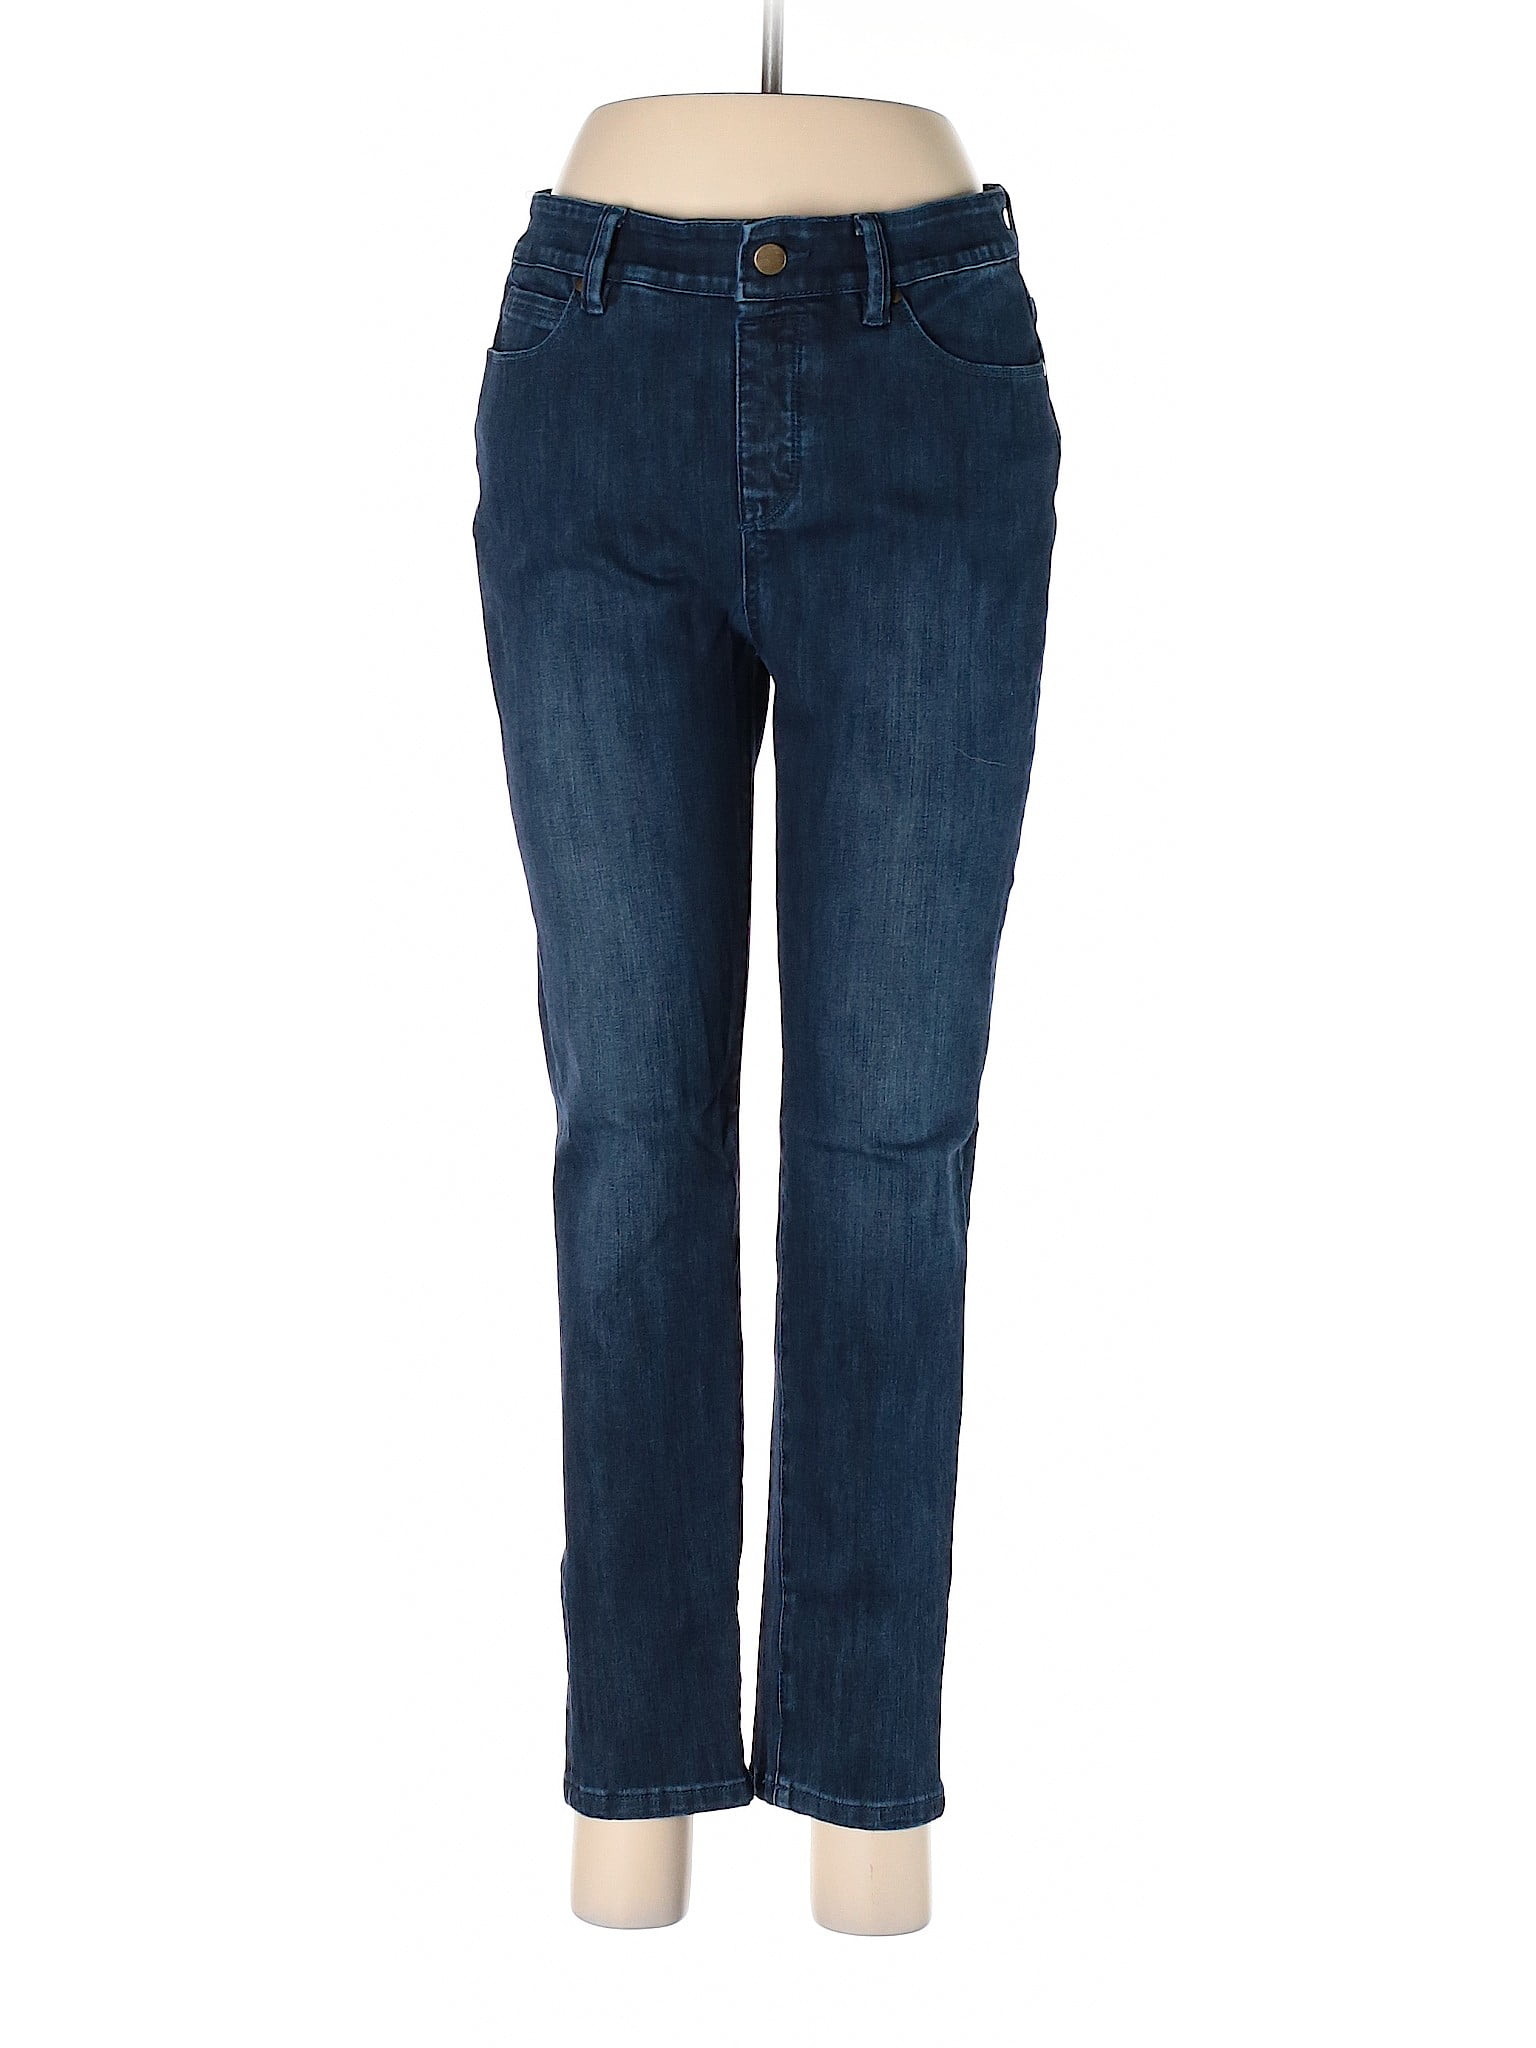 Soft Surroundings - Pre-Owned Soft Surroundings Women's Size S Jeans ...